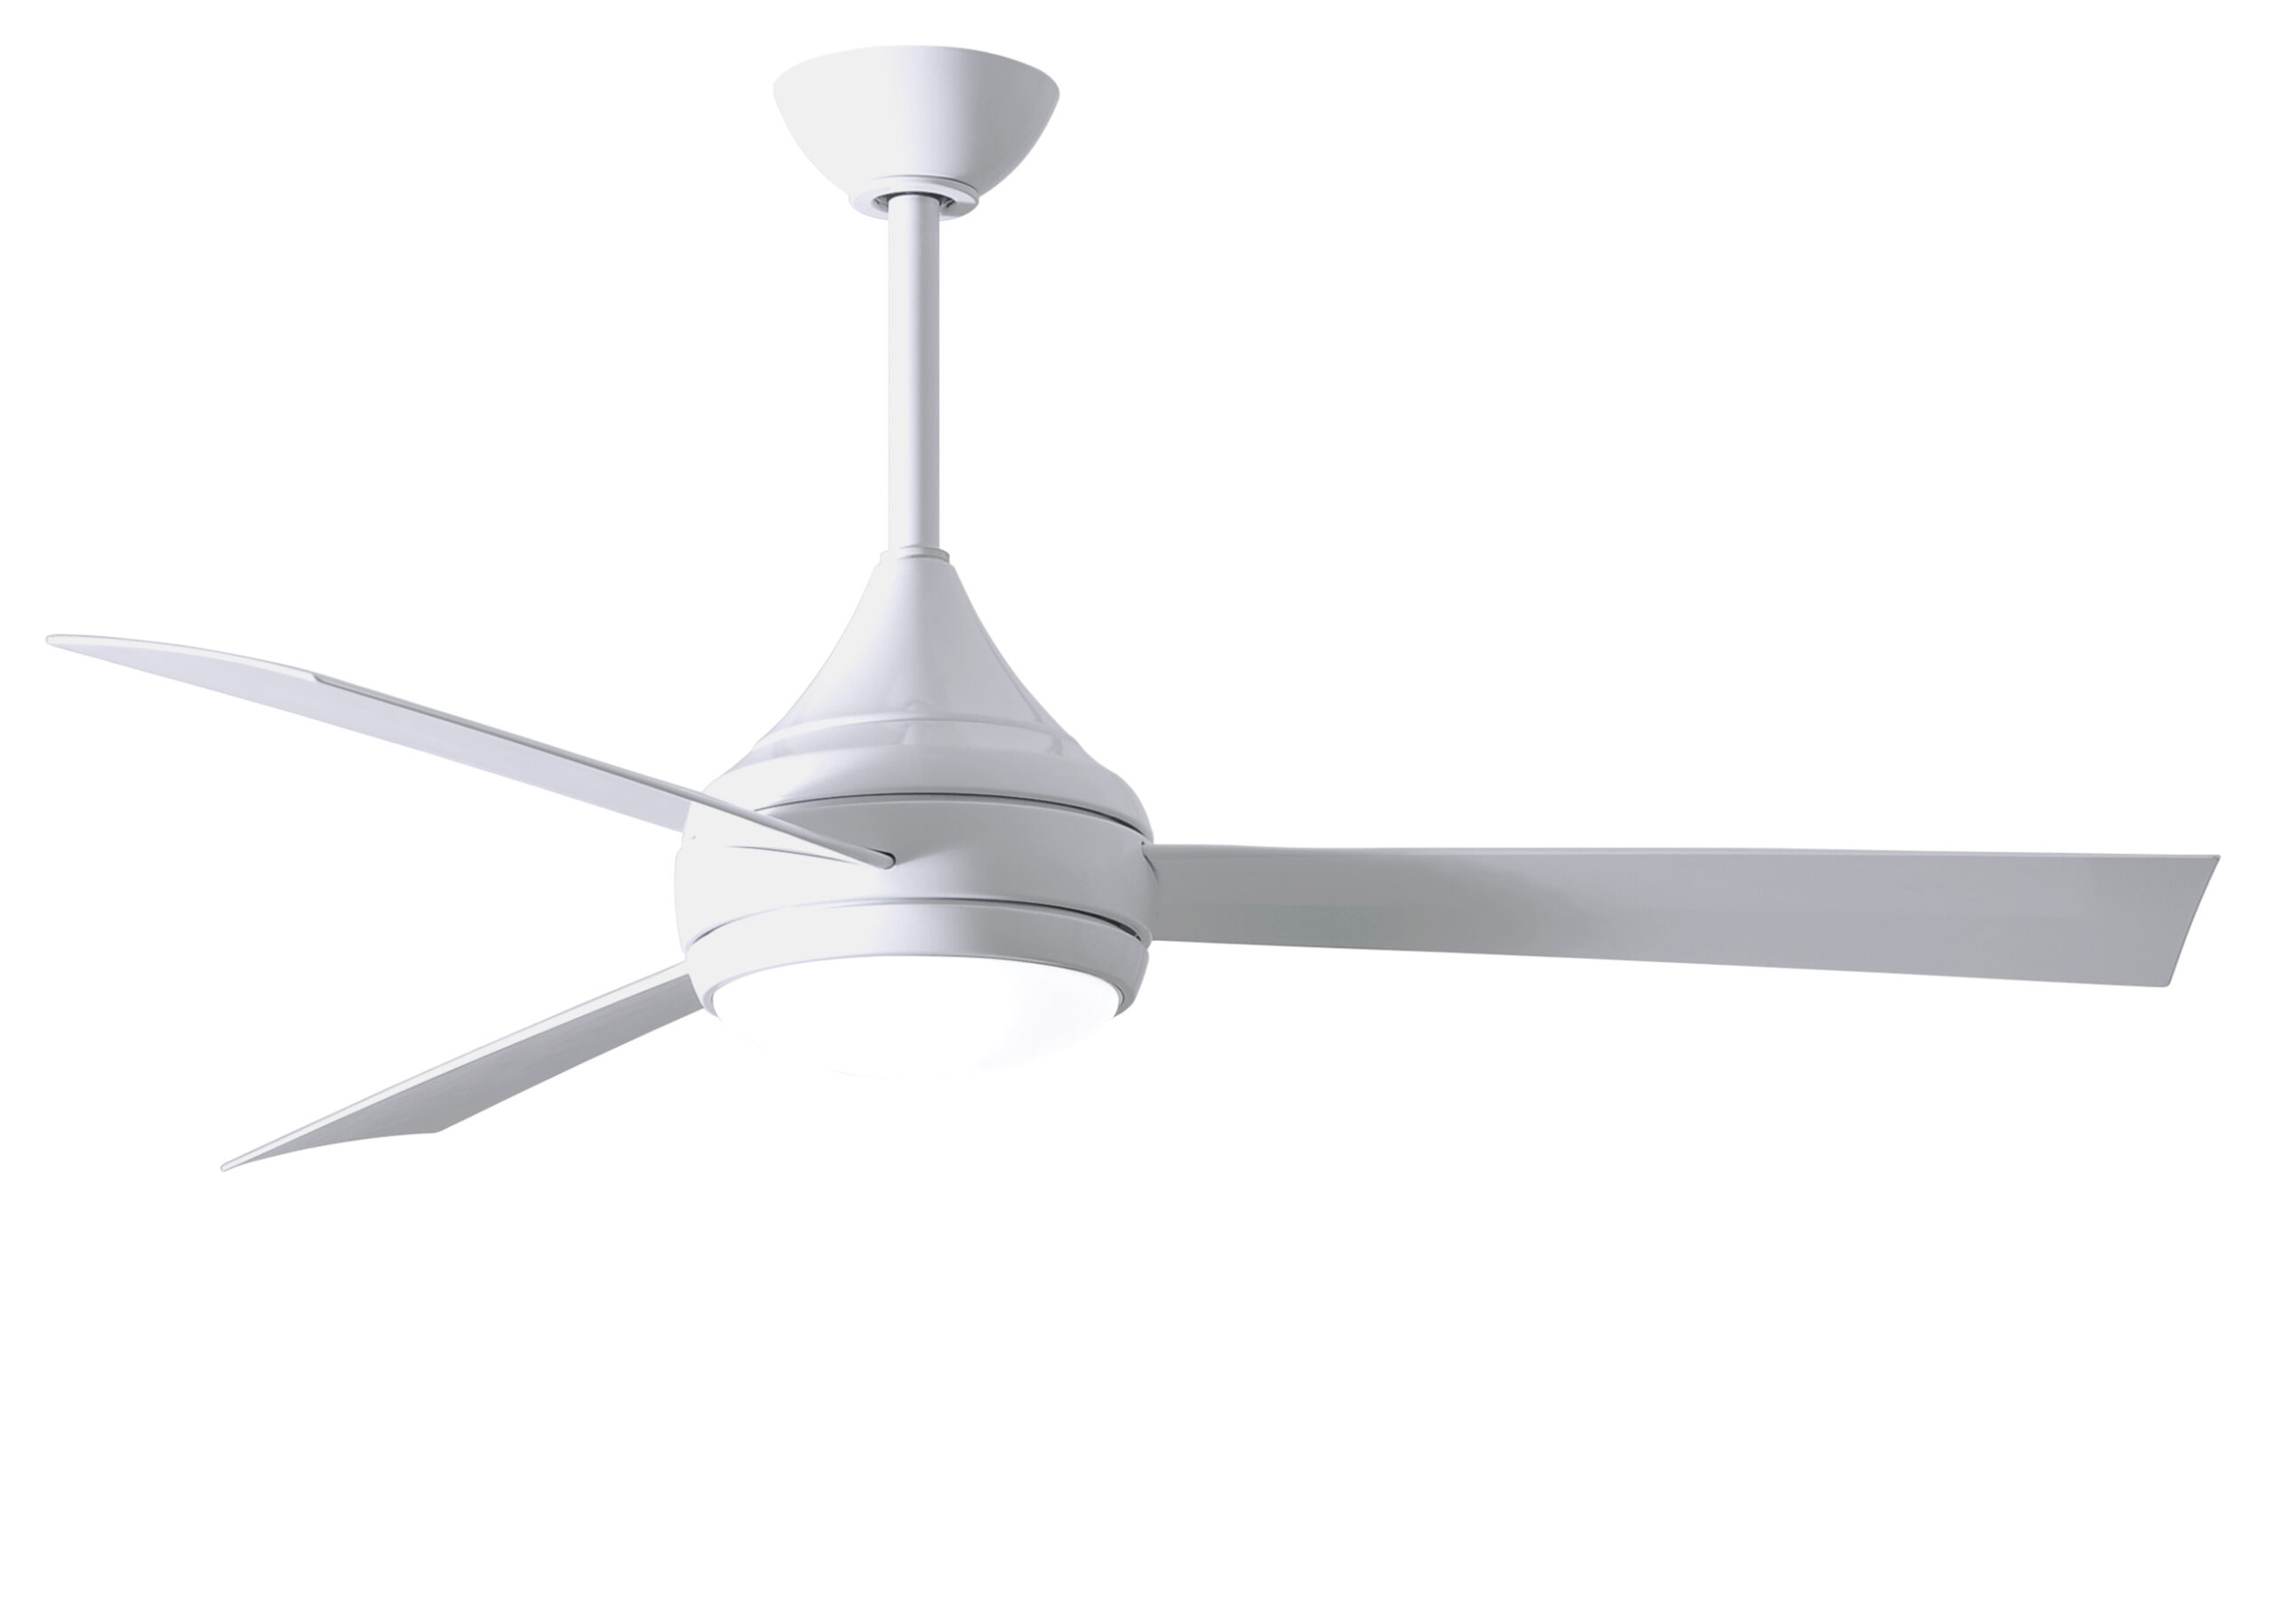 Donaire Ceiling Fan in Gloss White with Gloss White Blades